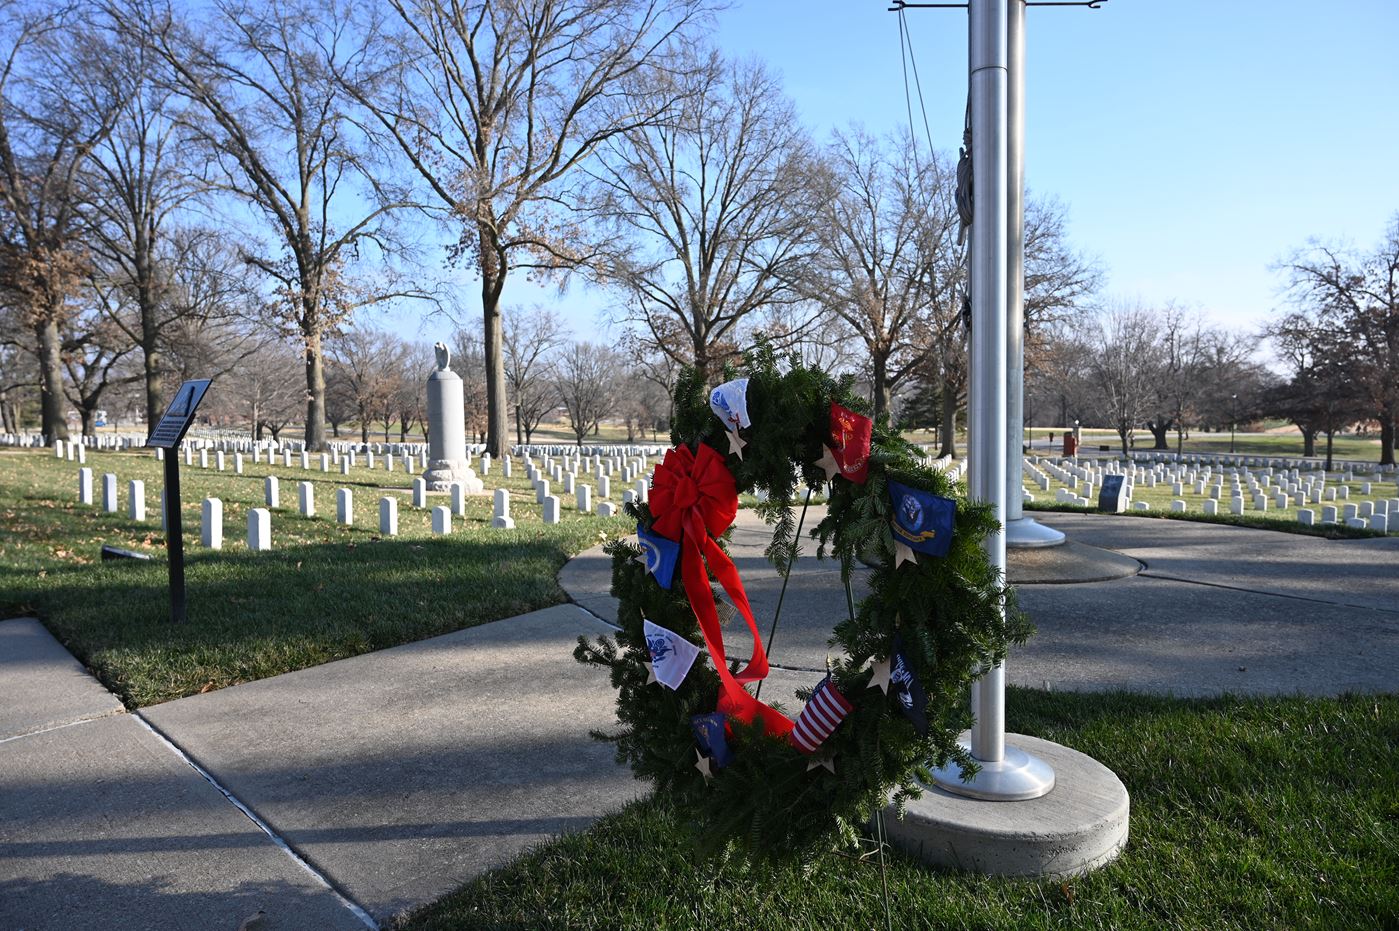 A ceremonial wreath placed at the base of the flagpole at the Fort Leavenworth National Cemetery during Wreaths Across America Day, Dec. 19, 2020. The tall monument with the eagle atop it in the background is the grave of Col. Henry Leavenworth who established "Cantonement Leavenworth" on May 8, 1827.